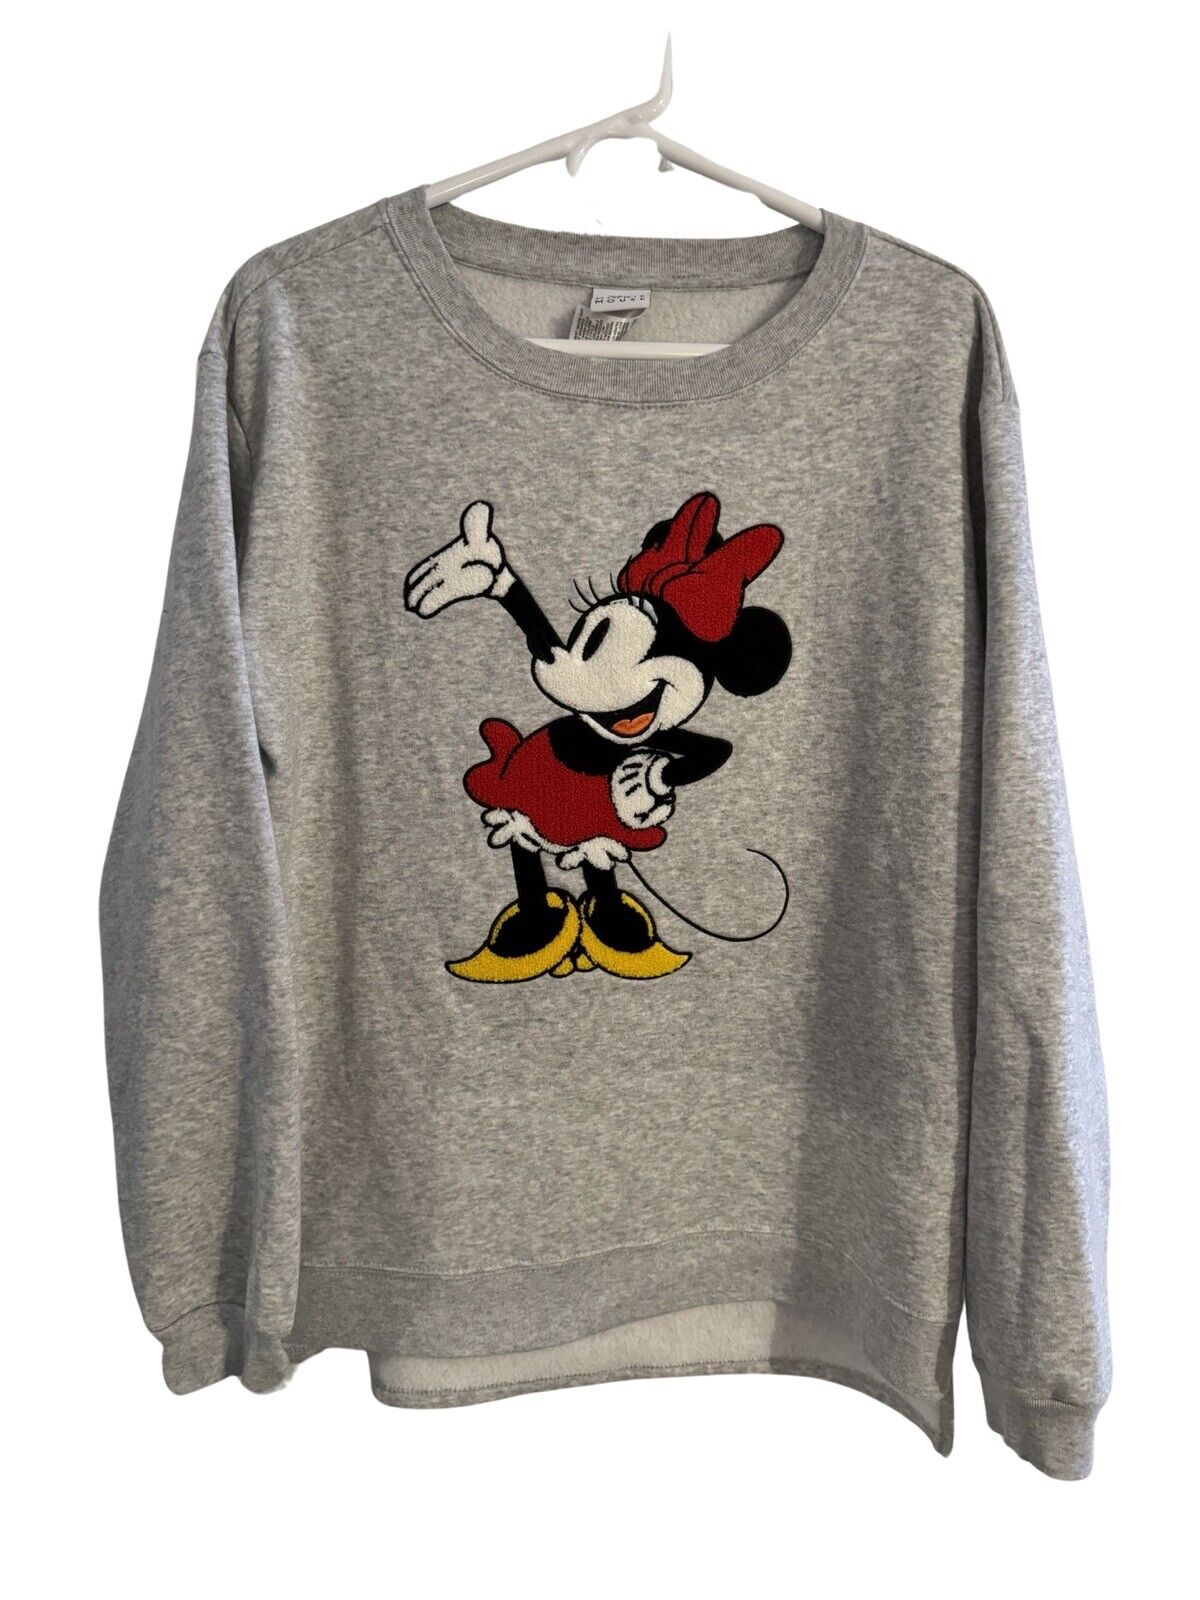 EUC Authentic Disney Women’s Large Embroiled Minnie Mouse Heather Gray